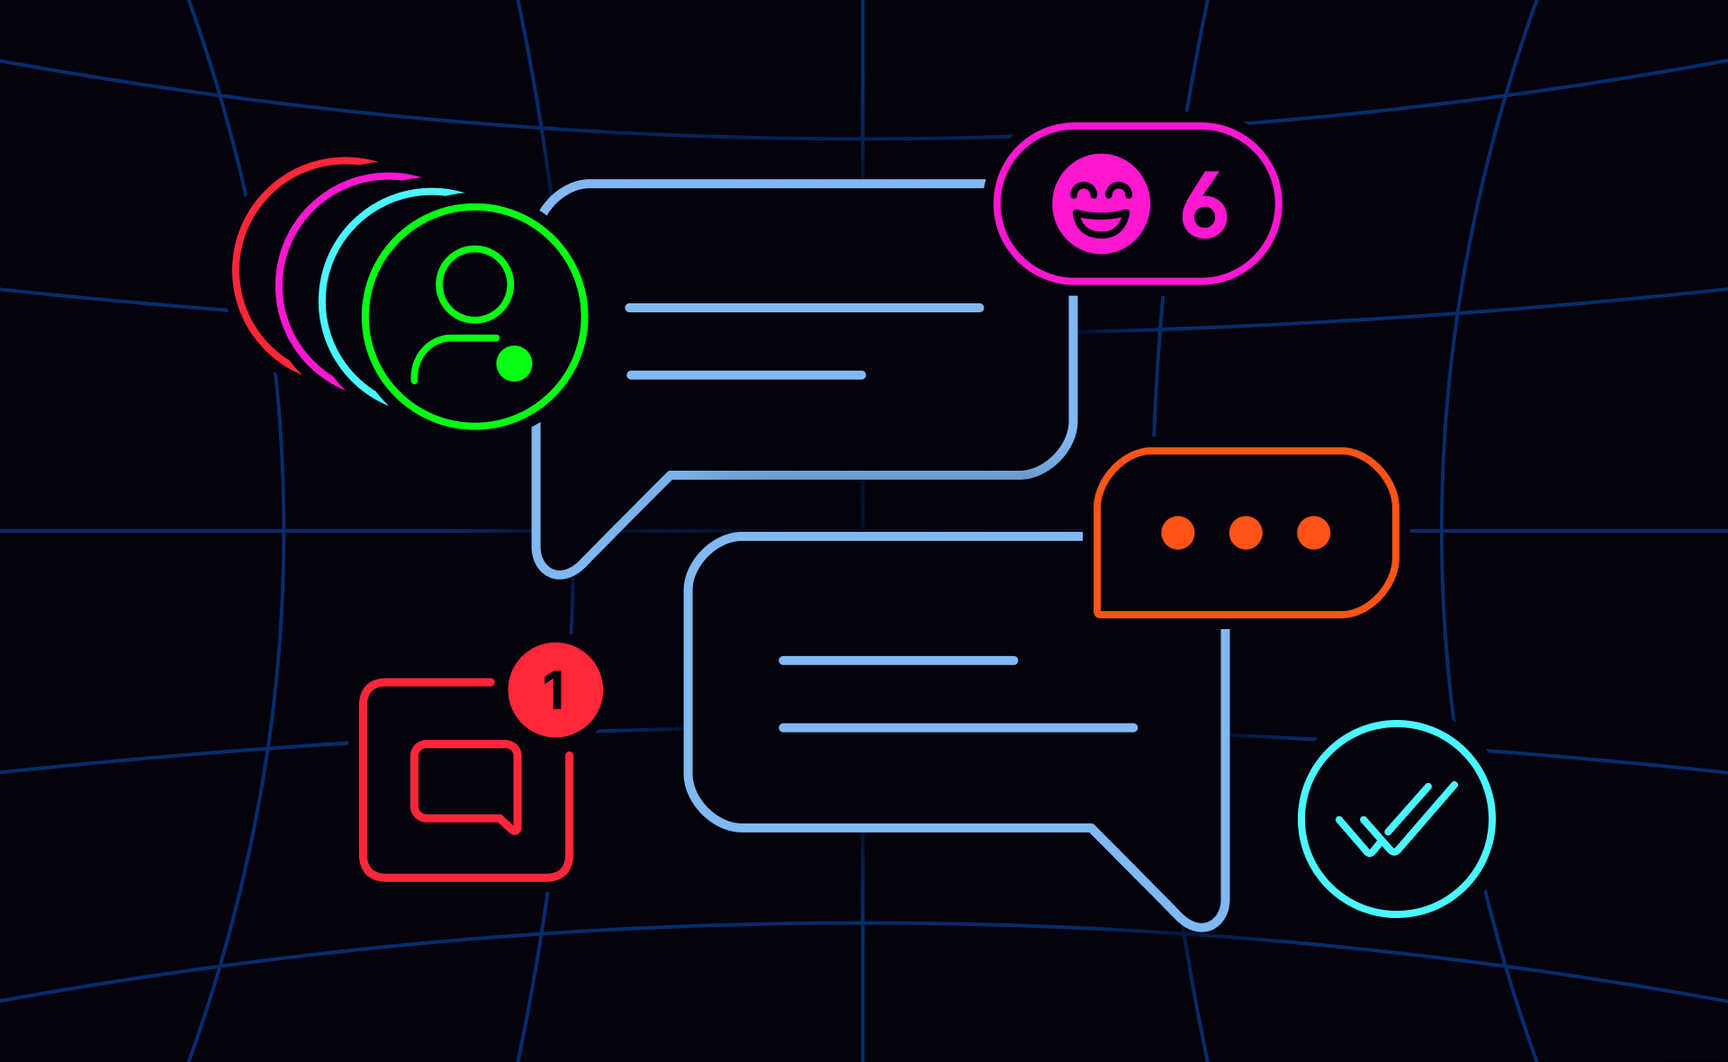 What it takes to build a realtime chat or messaging app